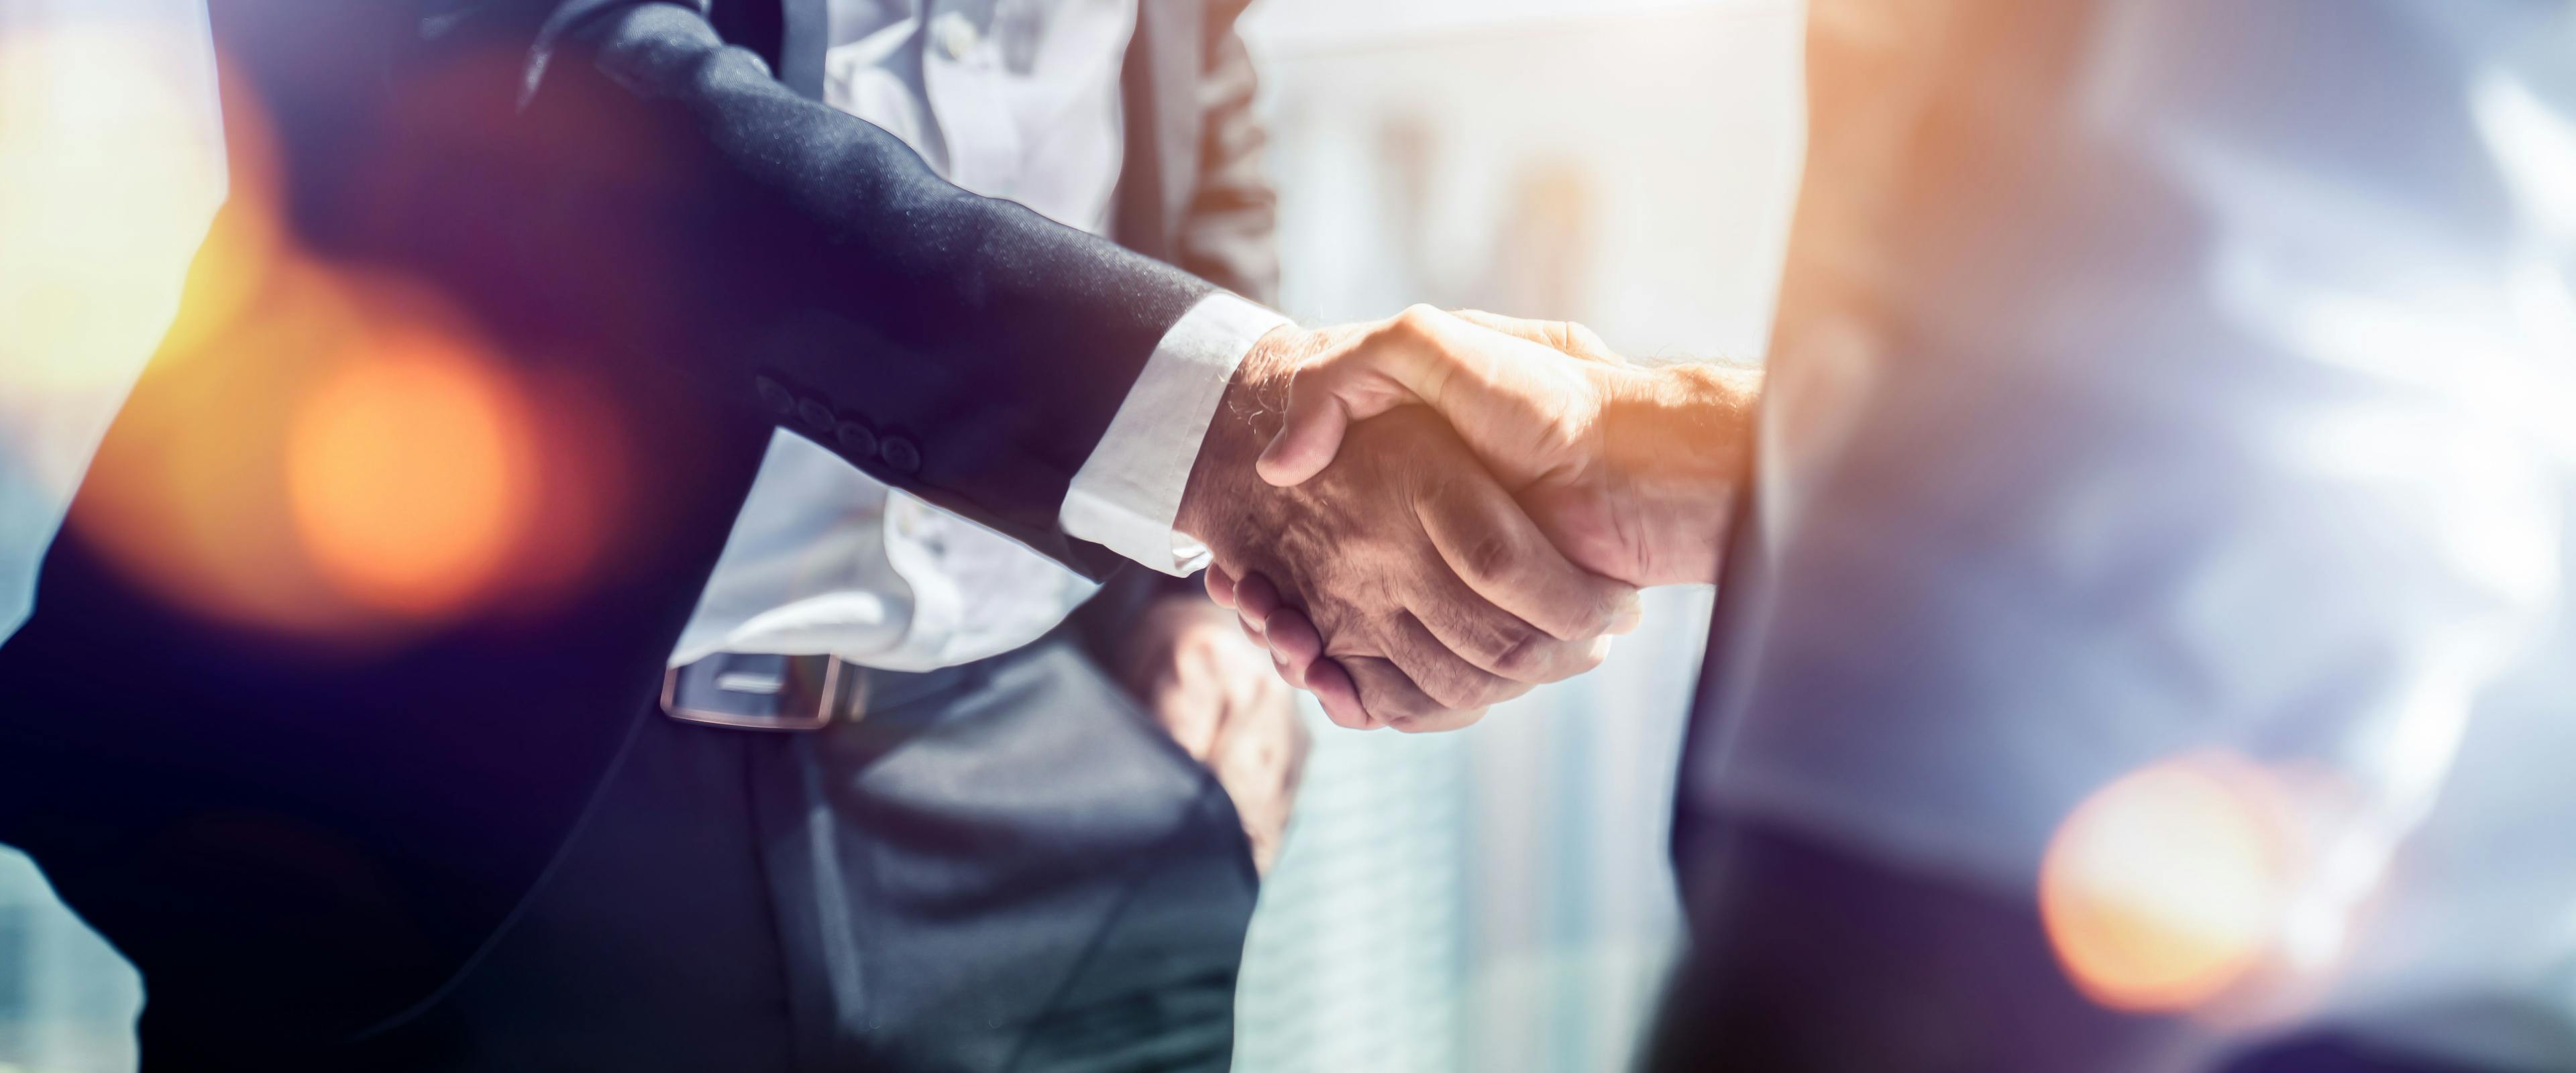 According to a news release from the companies, Alimera and Horus have agreed to expand their relationship beyond France, Belgium, Luxembourg and the Netherlands. (Image courtesy of Adobe Stock)